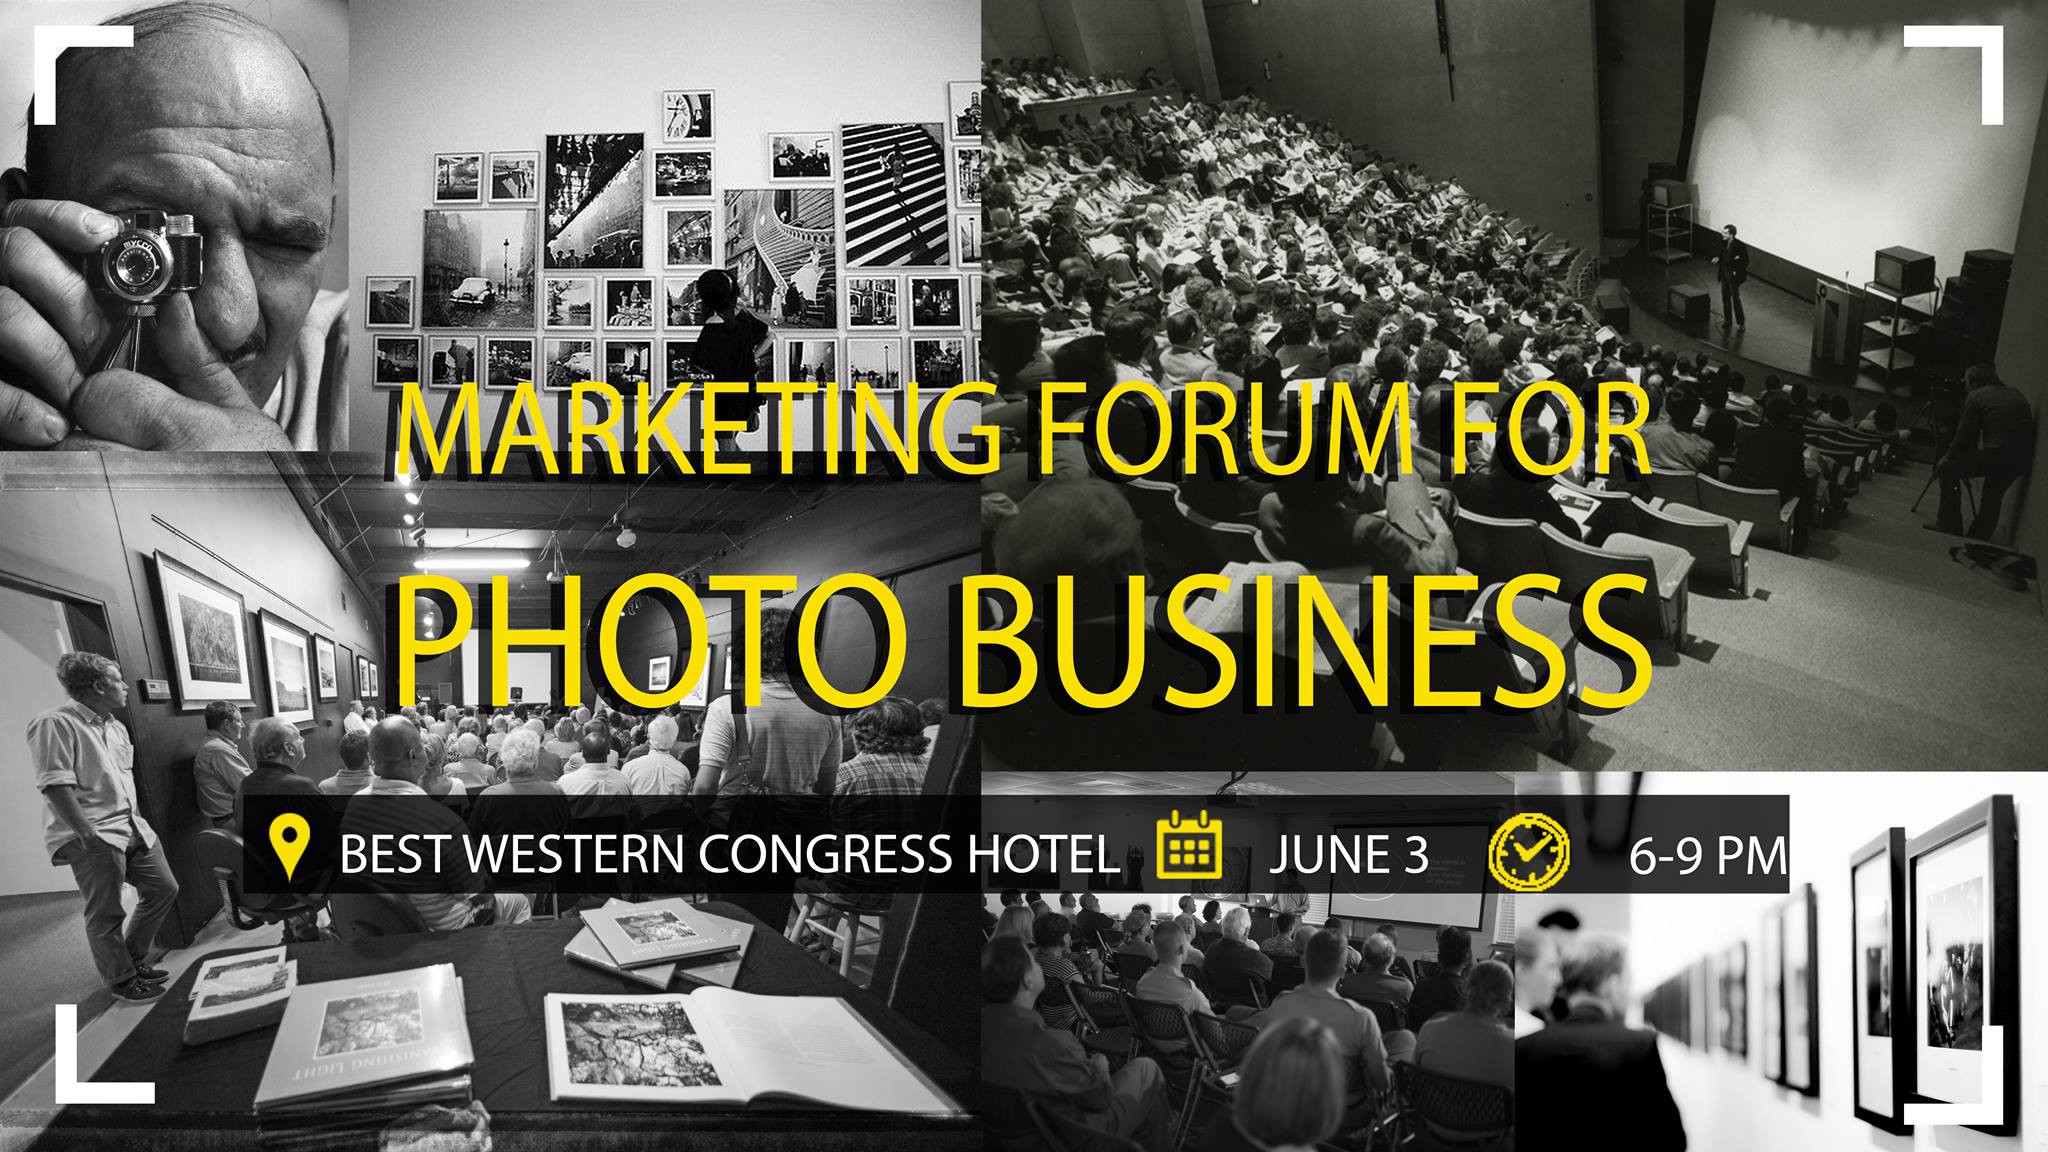 Marketing Forum for Photo Business 2017